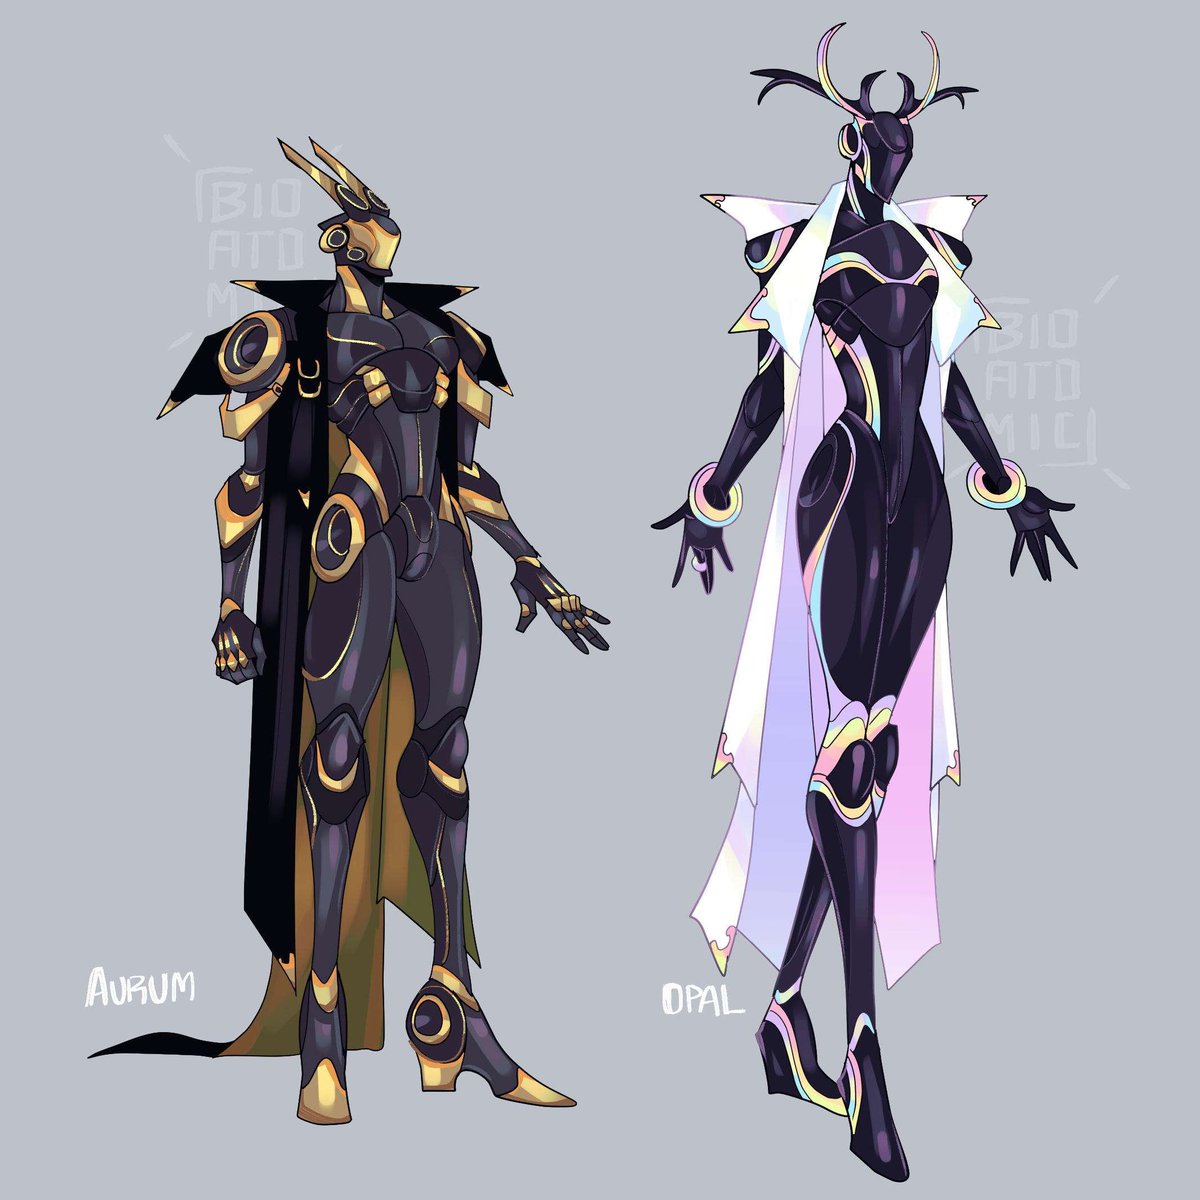 「New robot adopts dropped! Aurum and Opal」|☢BIOATOMIC☢のイラスト